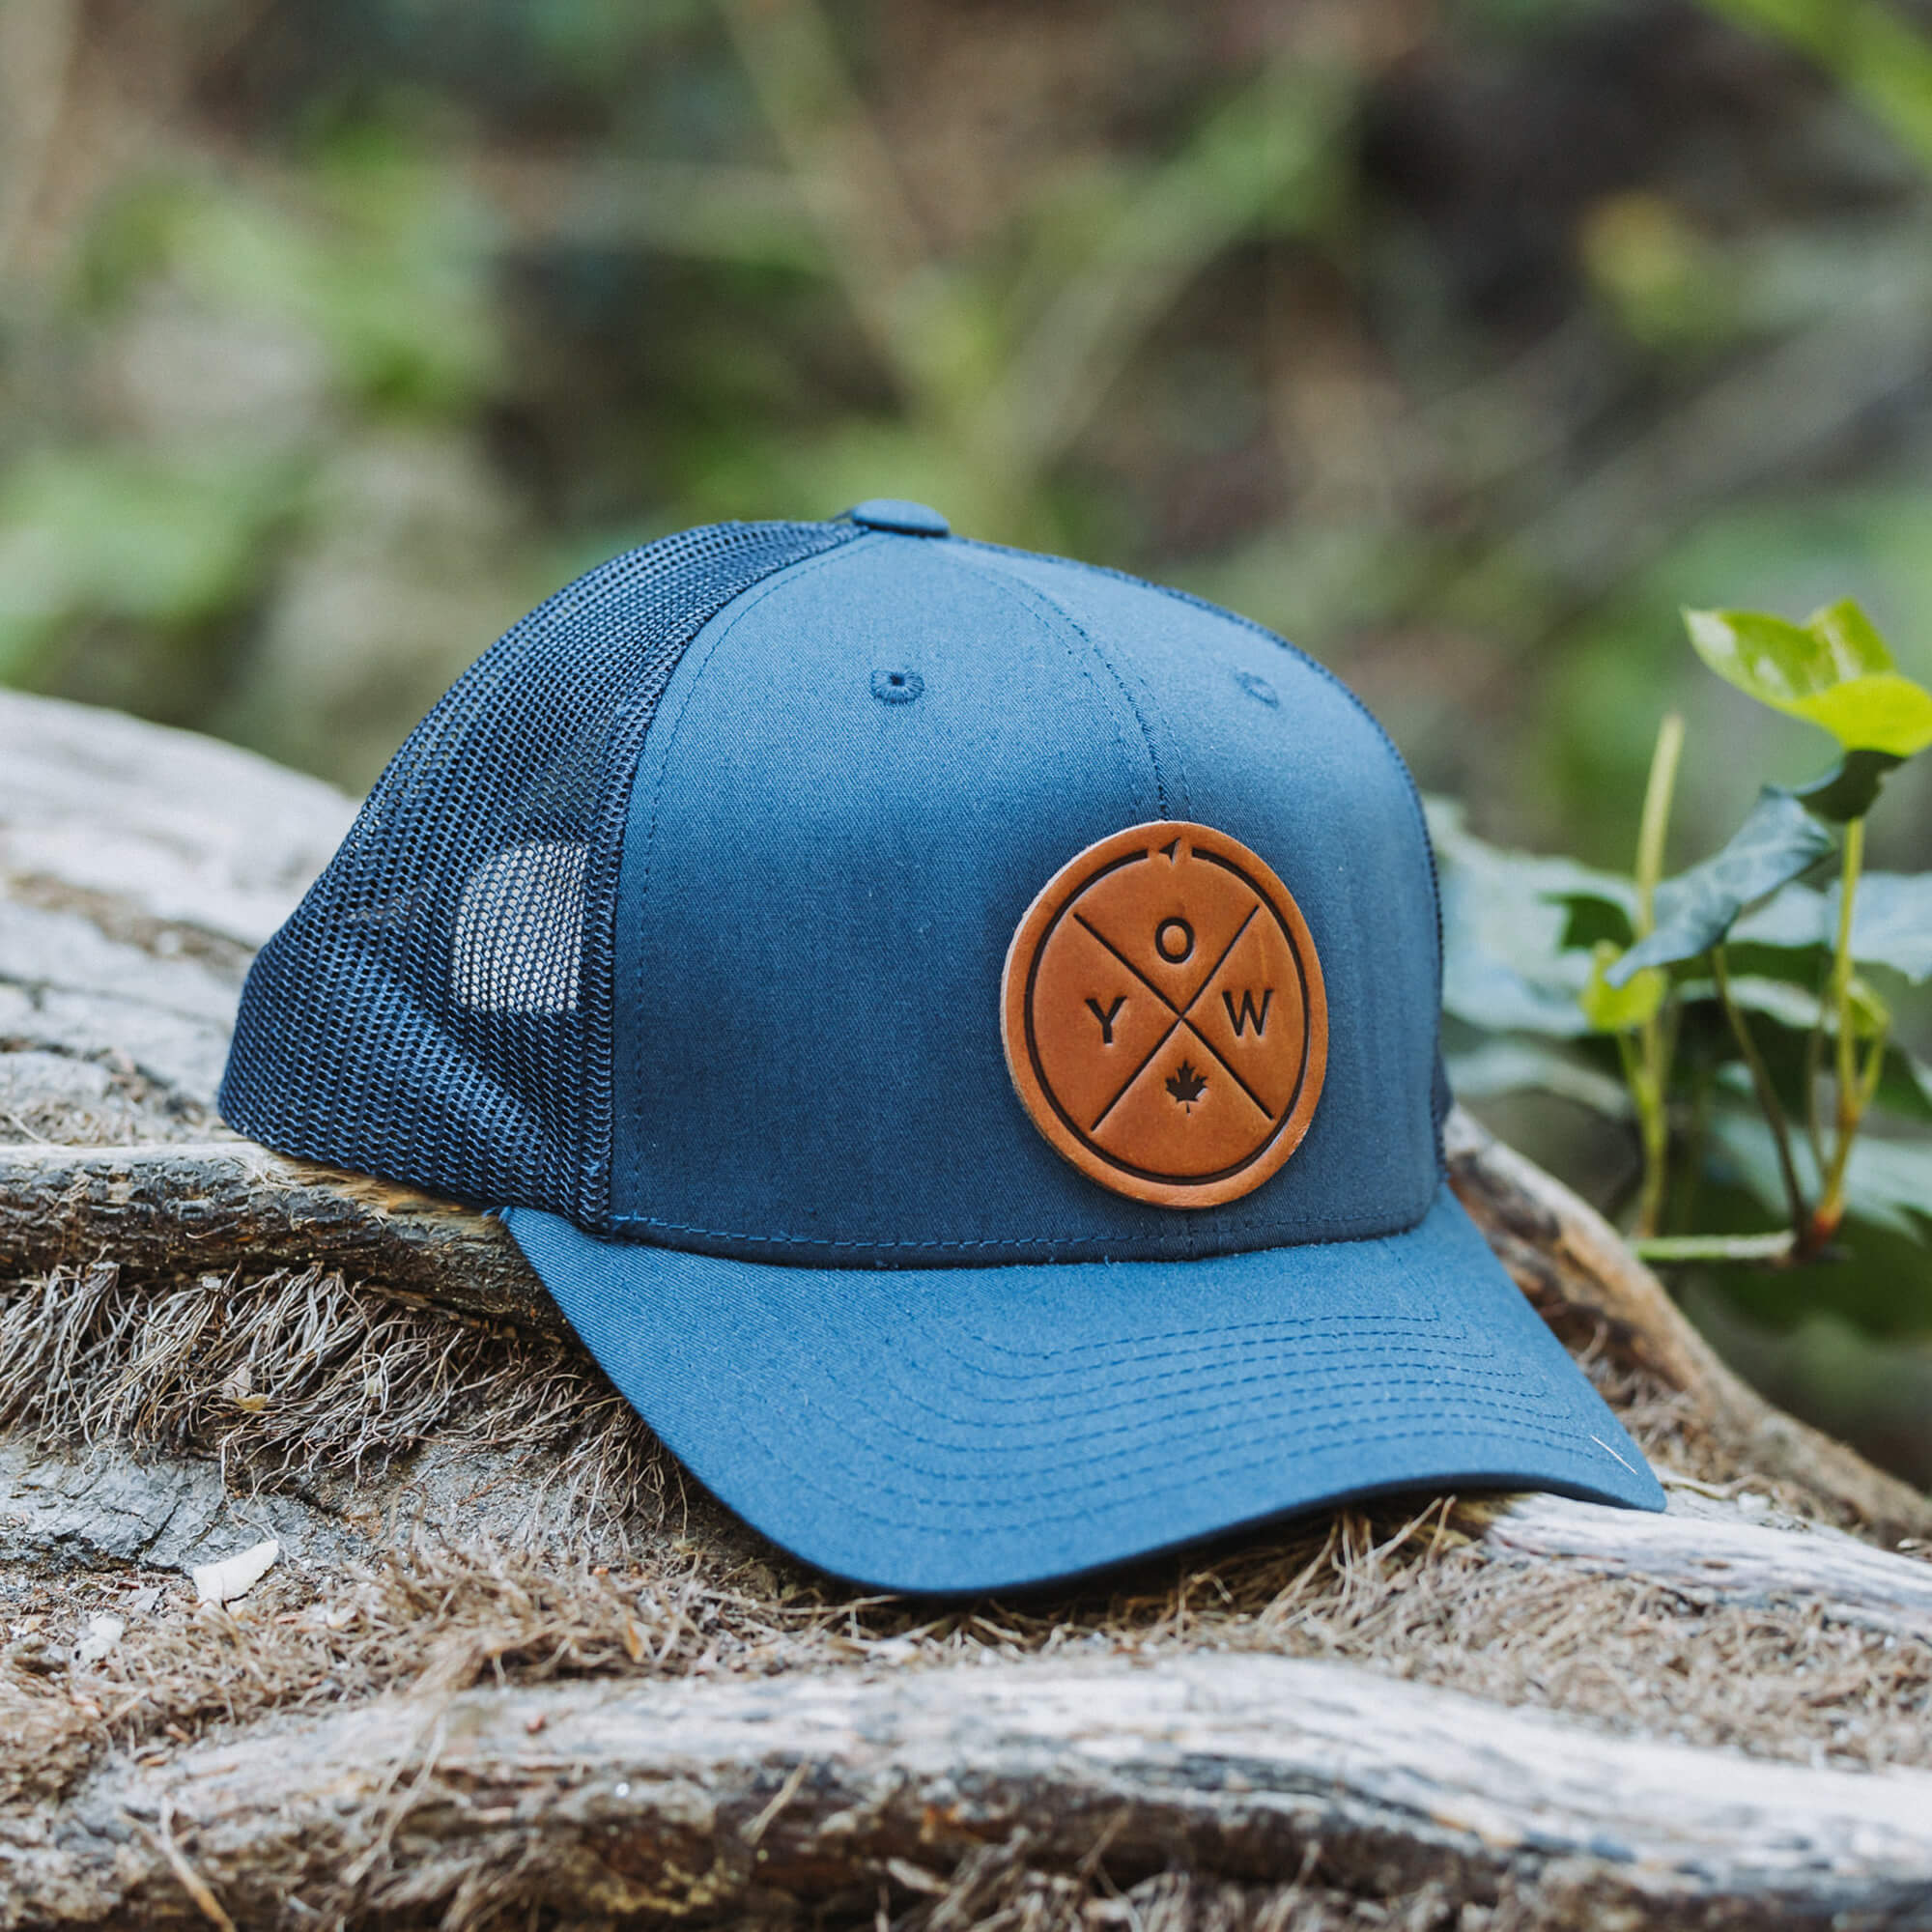 Navy trucker hat with full-grain leather patch with YOW embossing | BLACK-002-008, CHARC-002-008, NAVY-002-008, HGREY-002-008, MOSS-002-008, BROWN-002-008